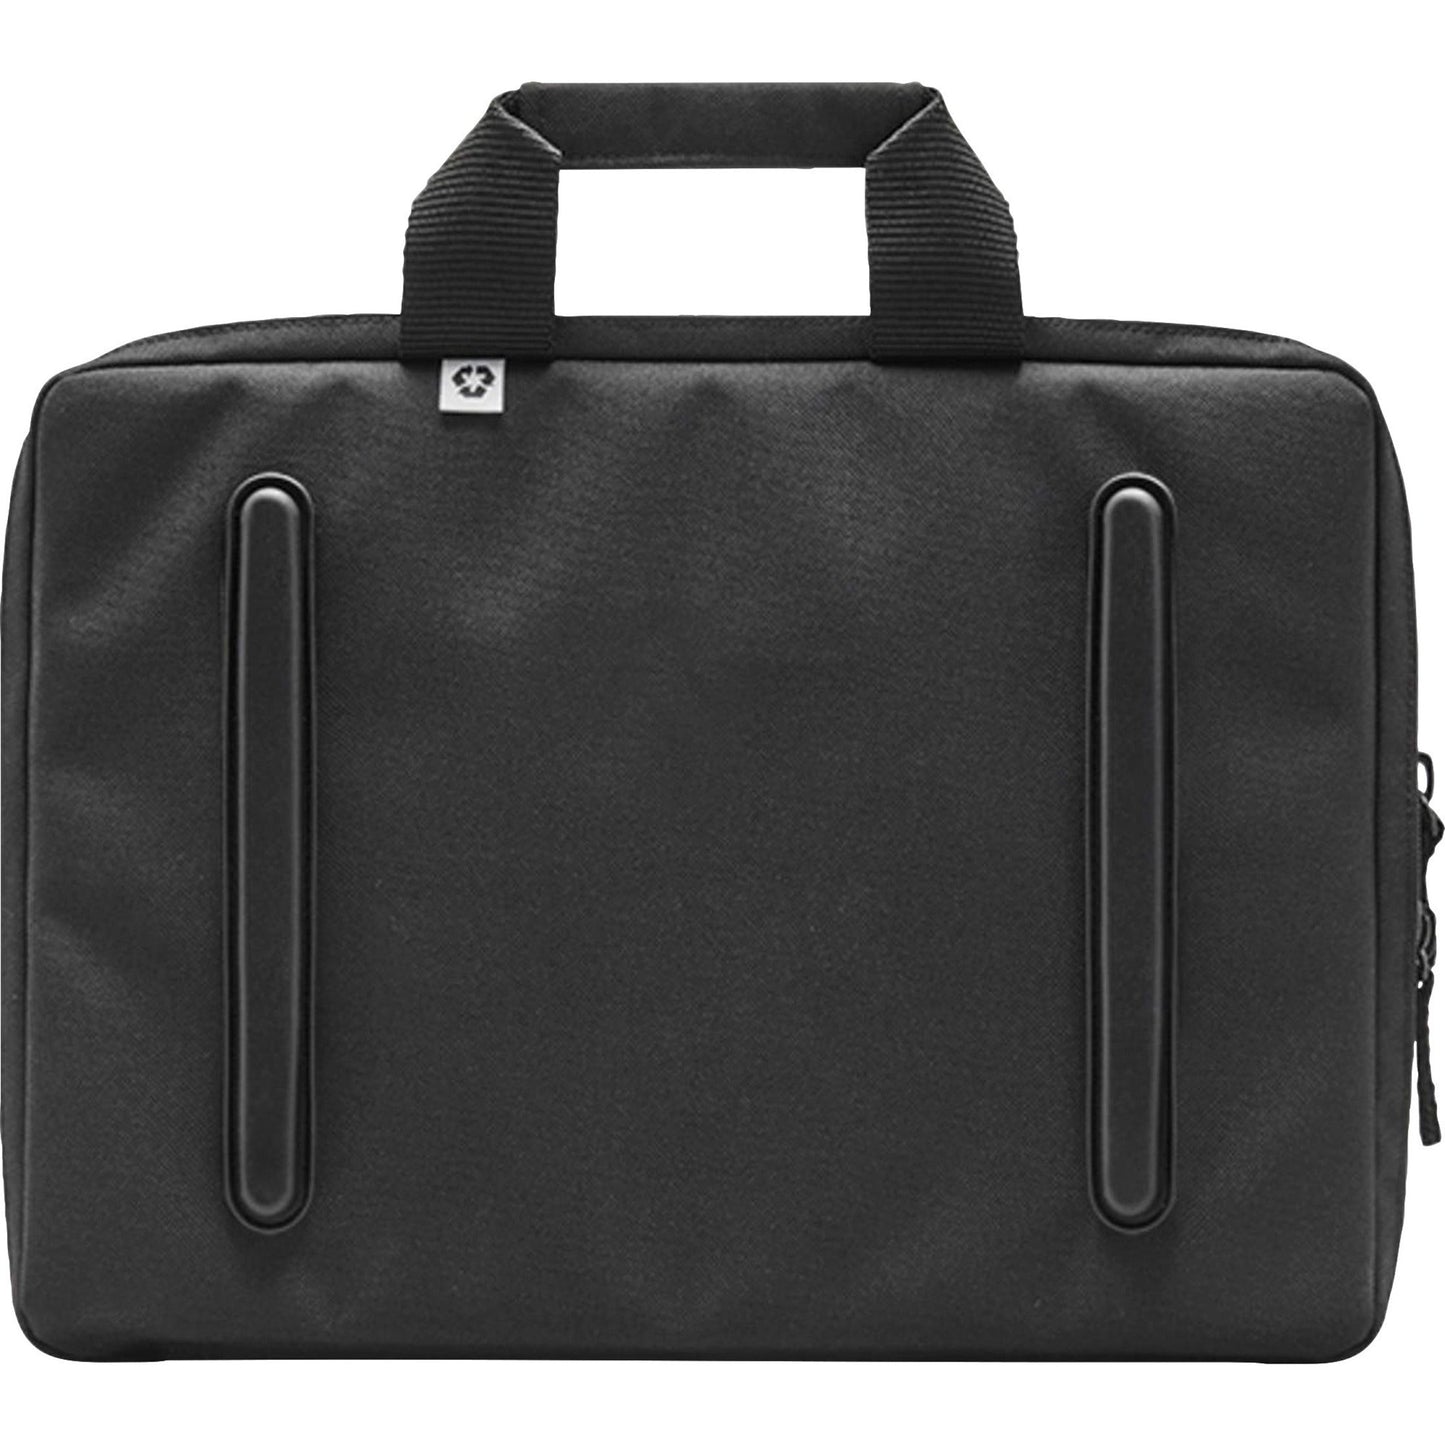 Solo Carrying Case for 13.3" Chromebook Notebook - Black